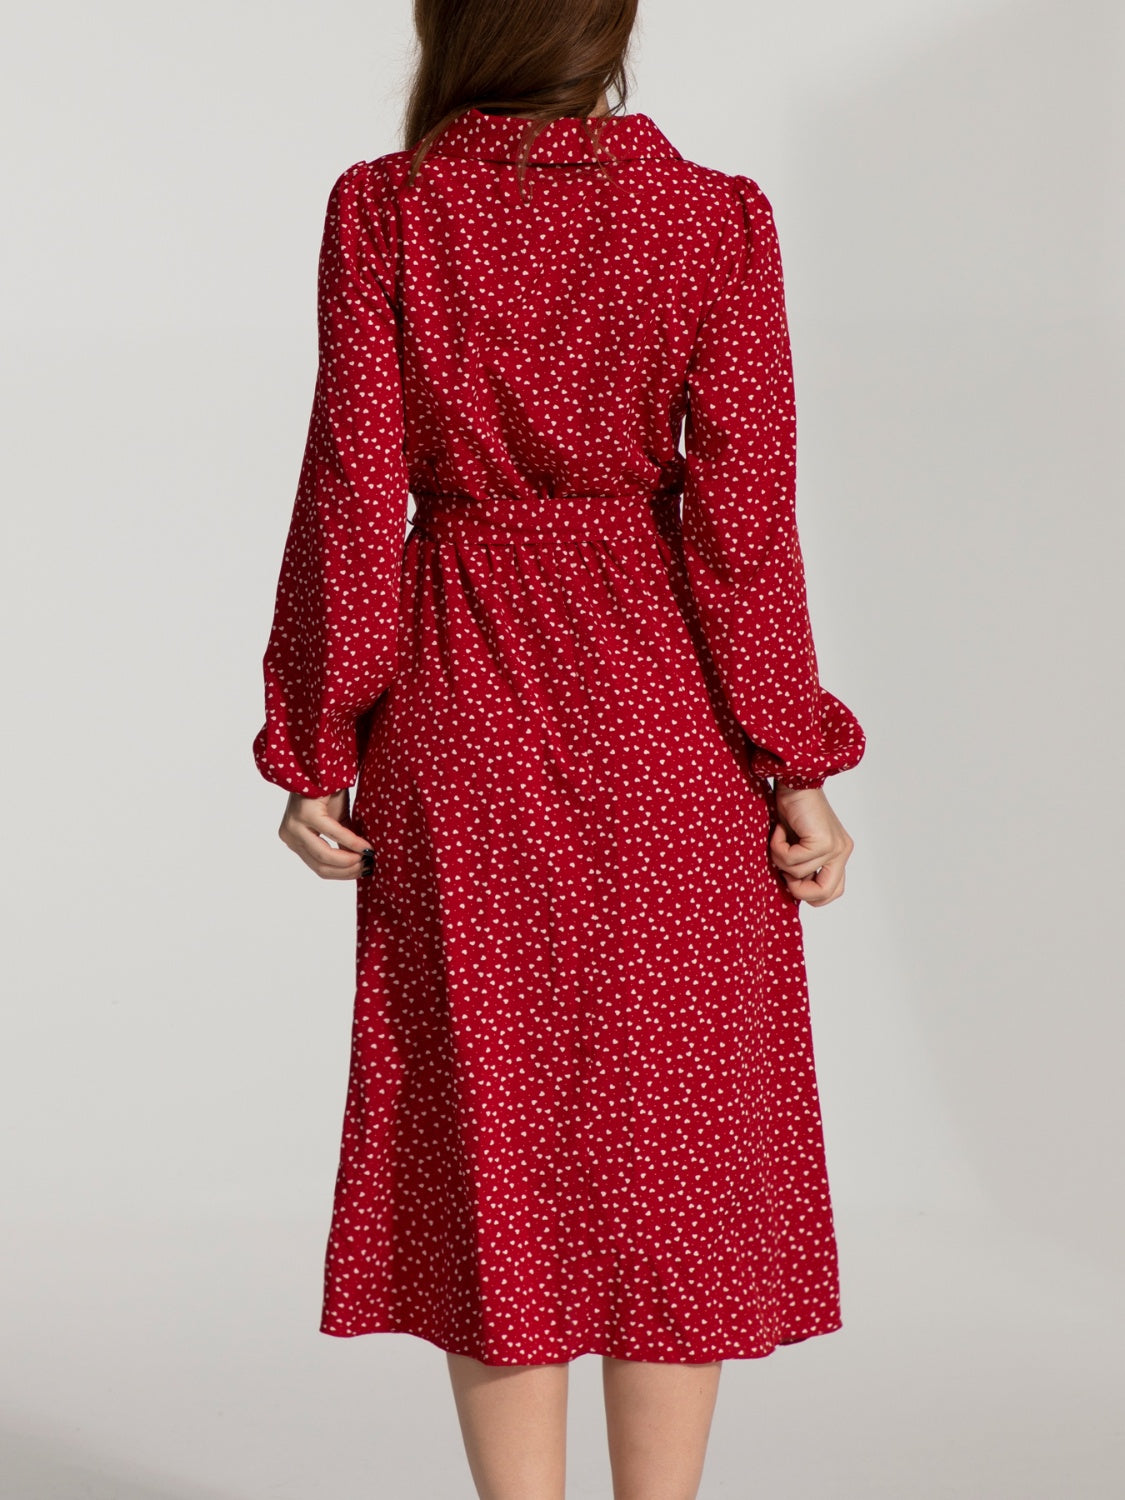 Tied Printed Button Up Balloon Sleeve Dress 